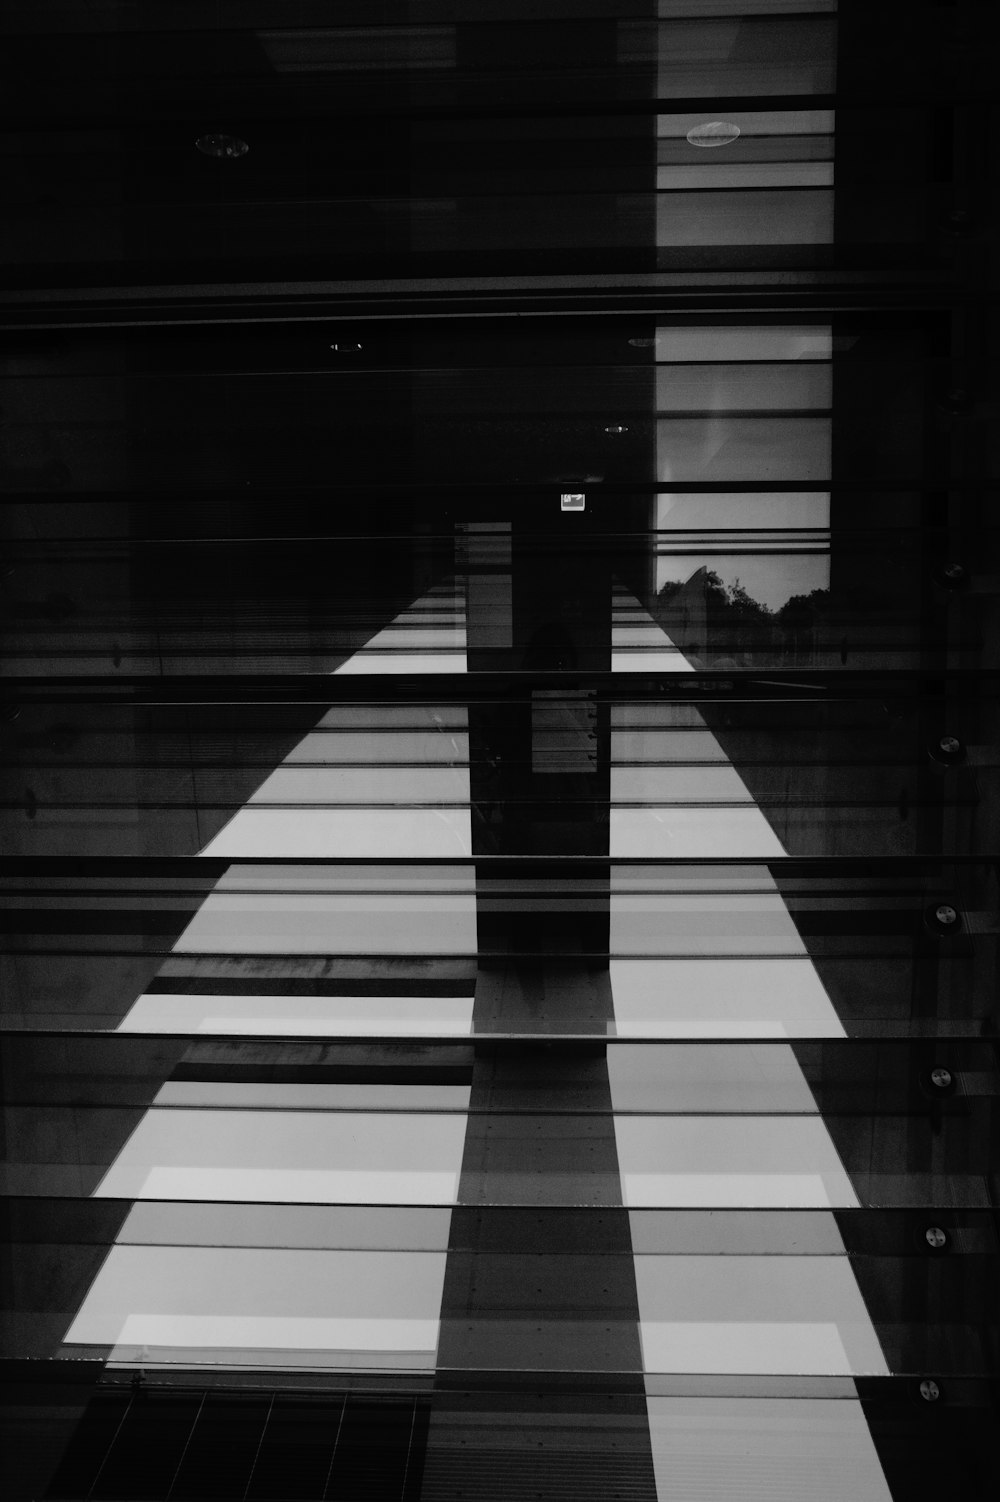 a black and white photo of a checkered floor